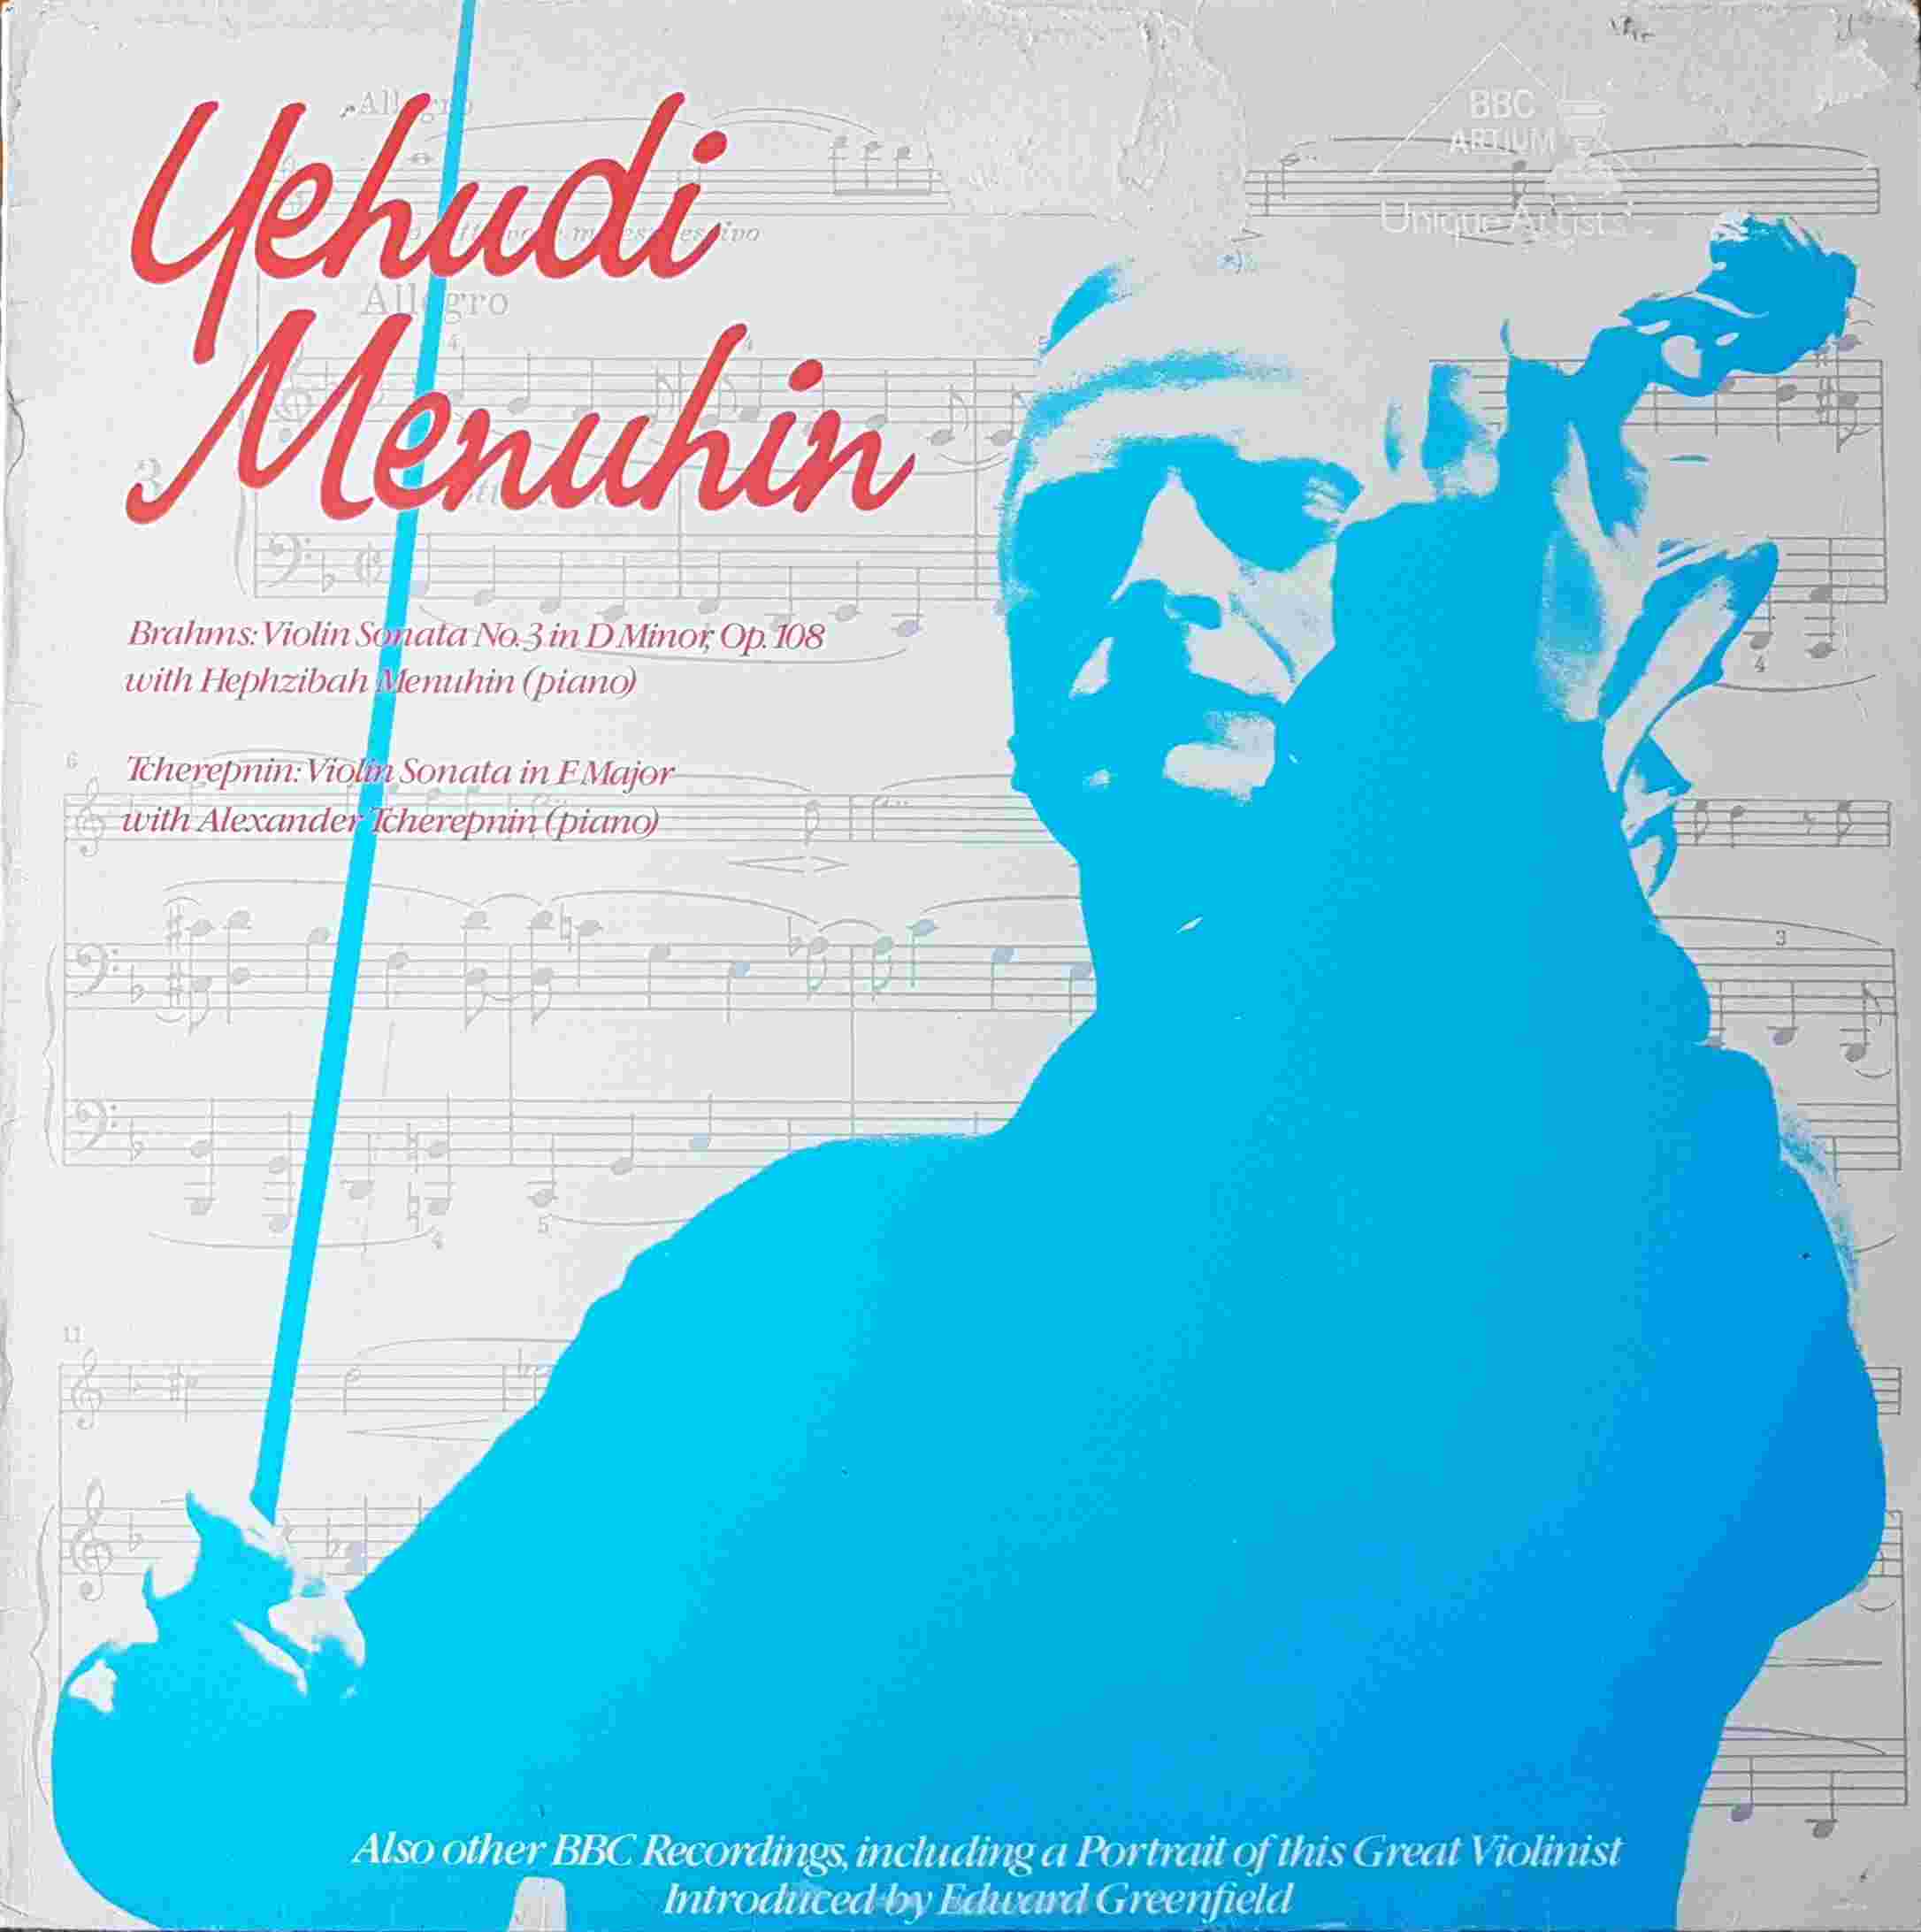 Picture of REGL 409 Yehudi Menuhin by artist Yehudi Menuhin from the BBC albums - Records and Tapes library